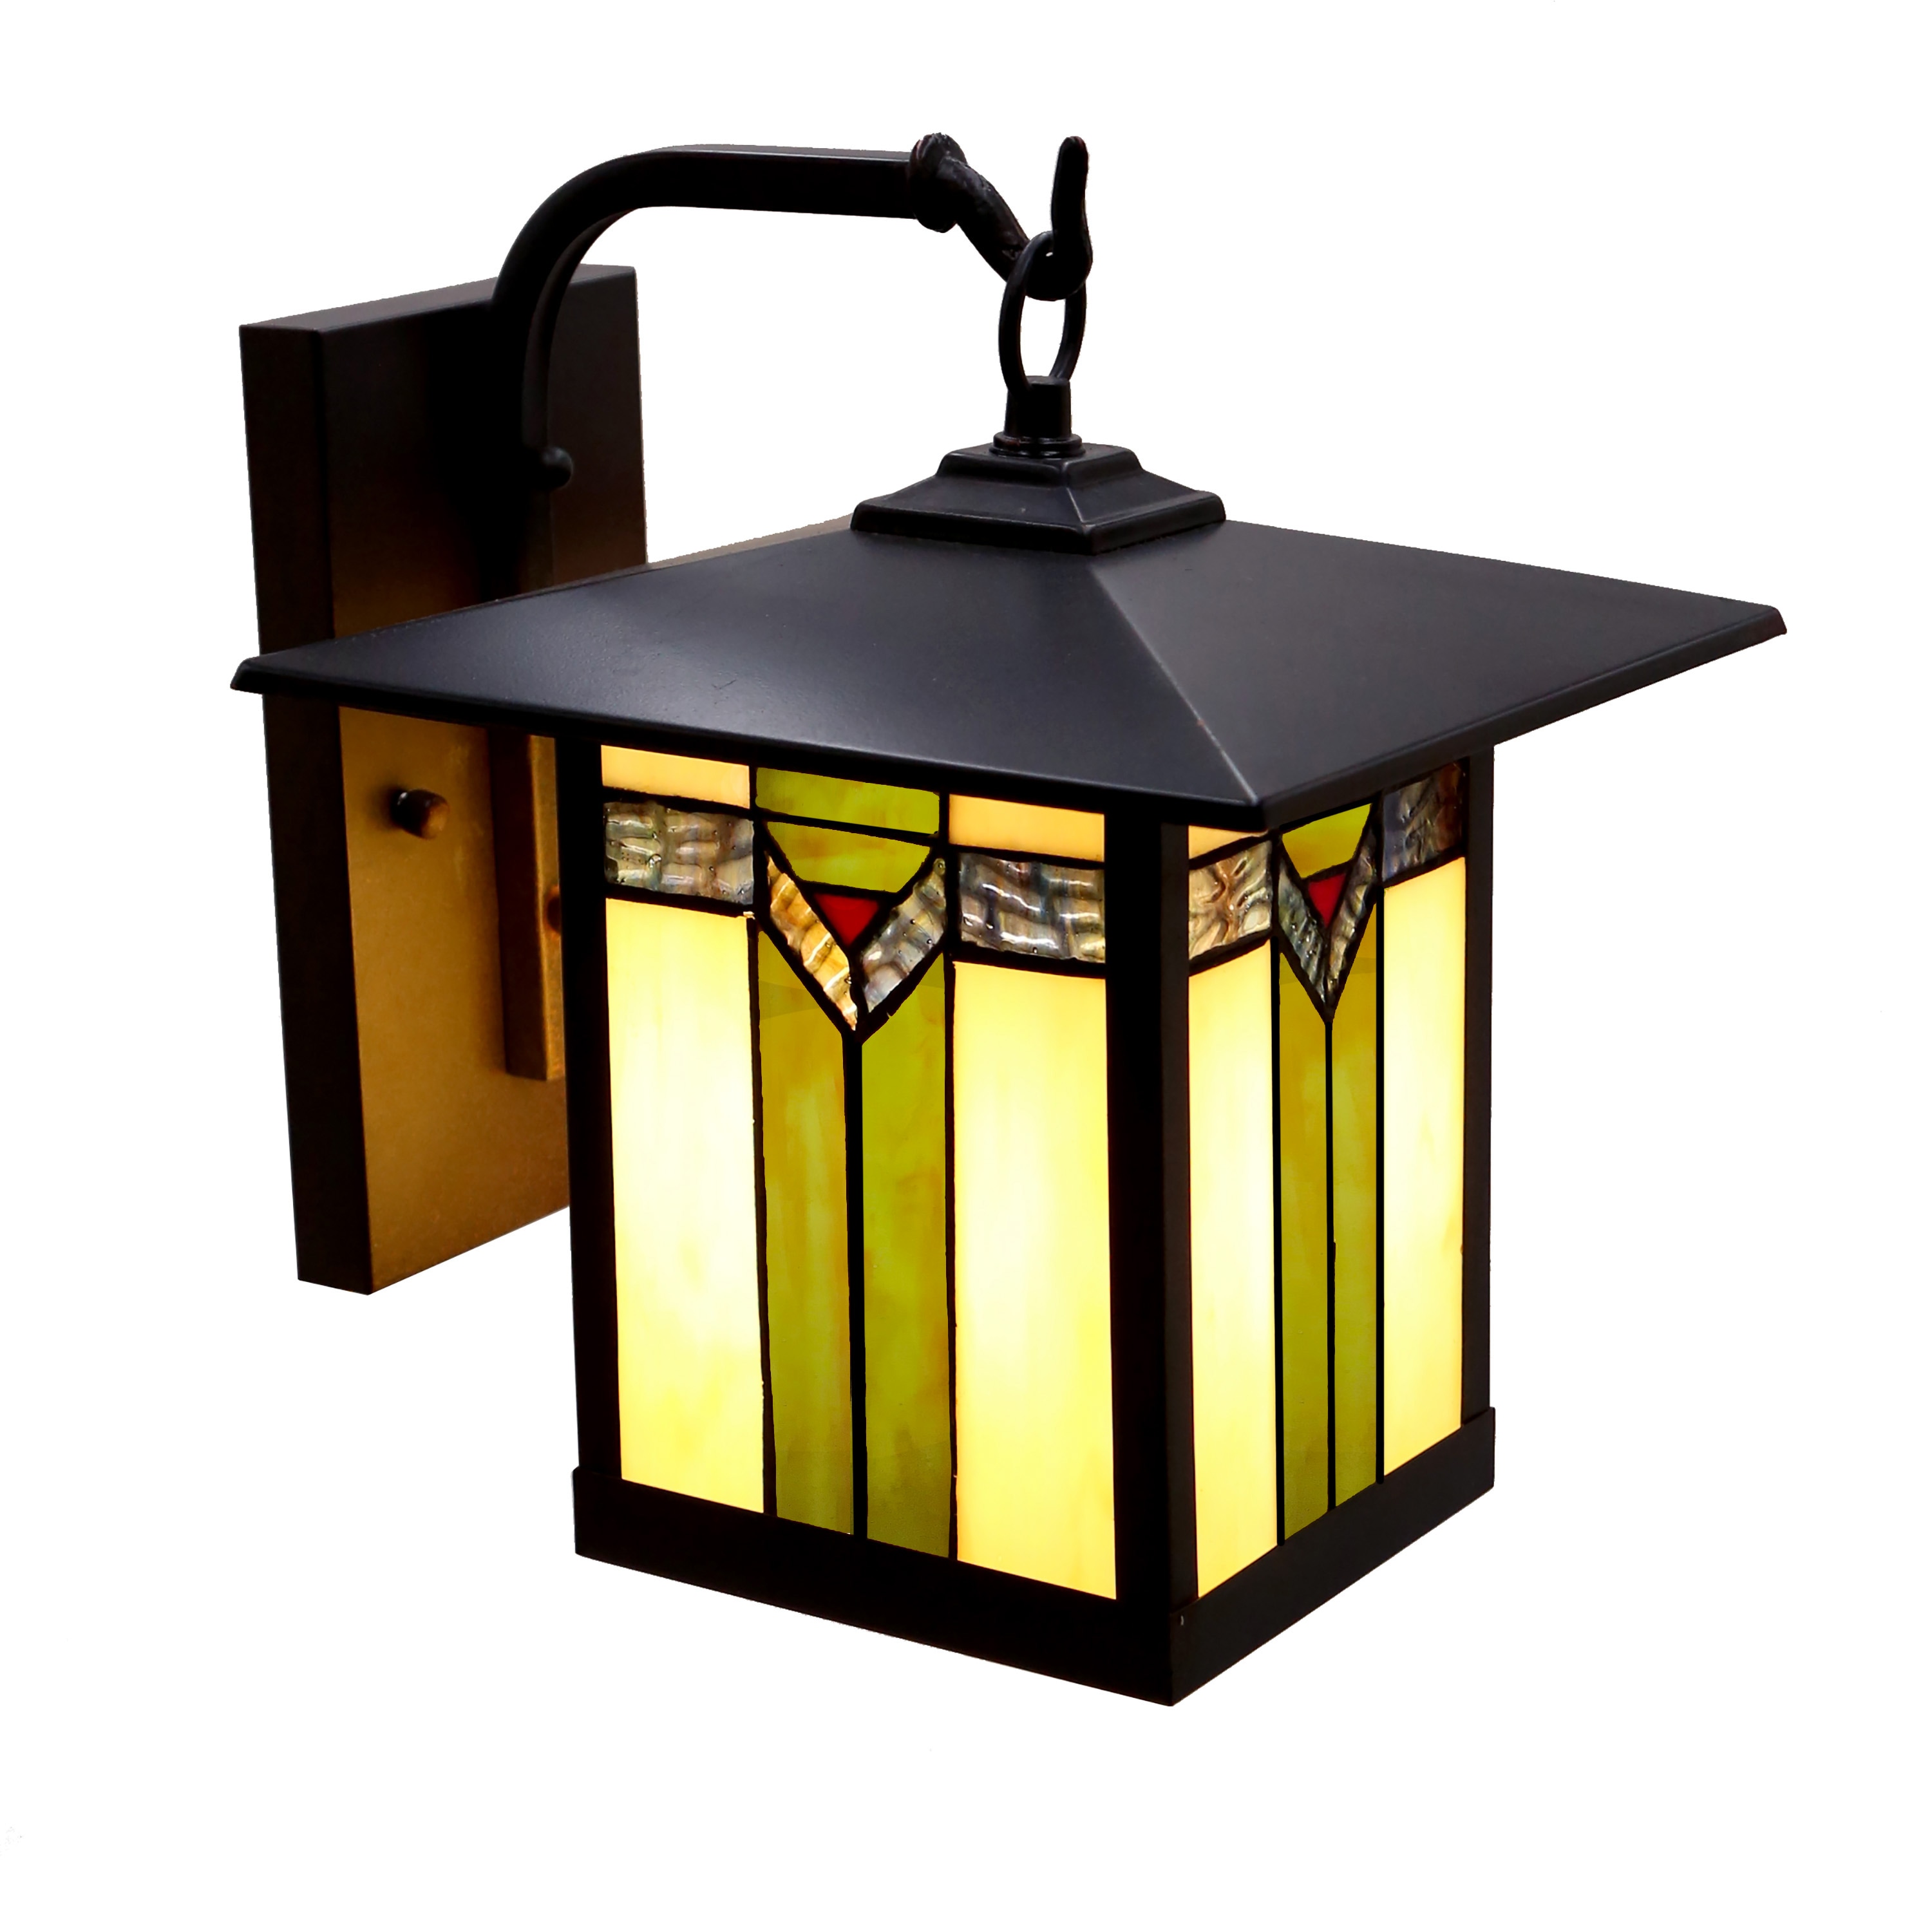 Tiffany Outdoor Lighting at Lowes.com